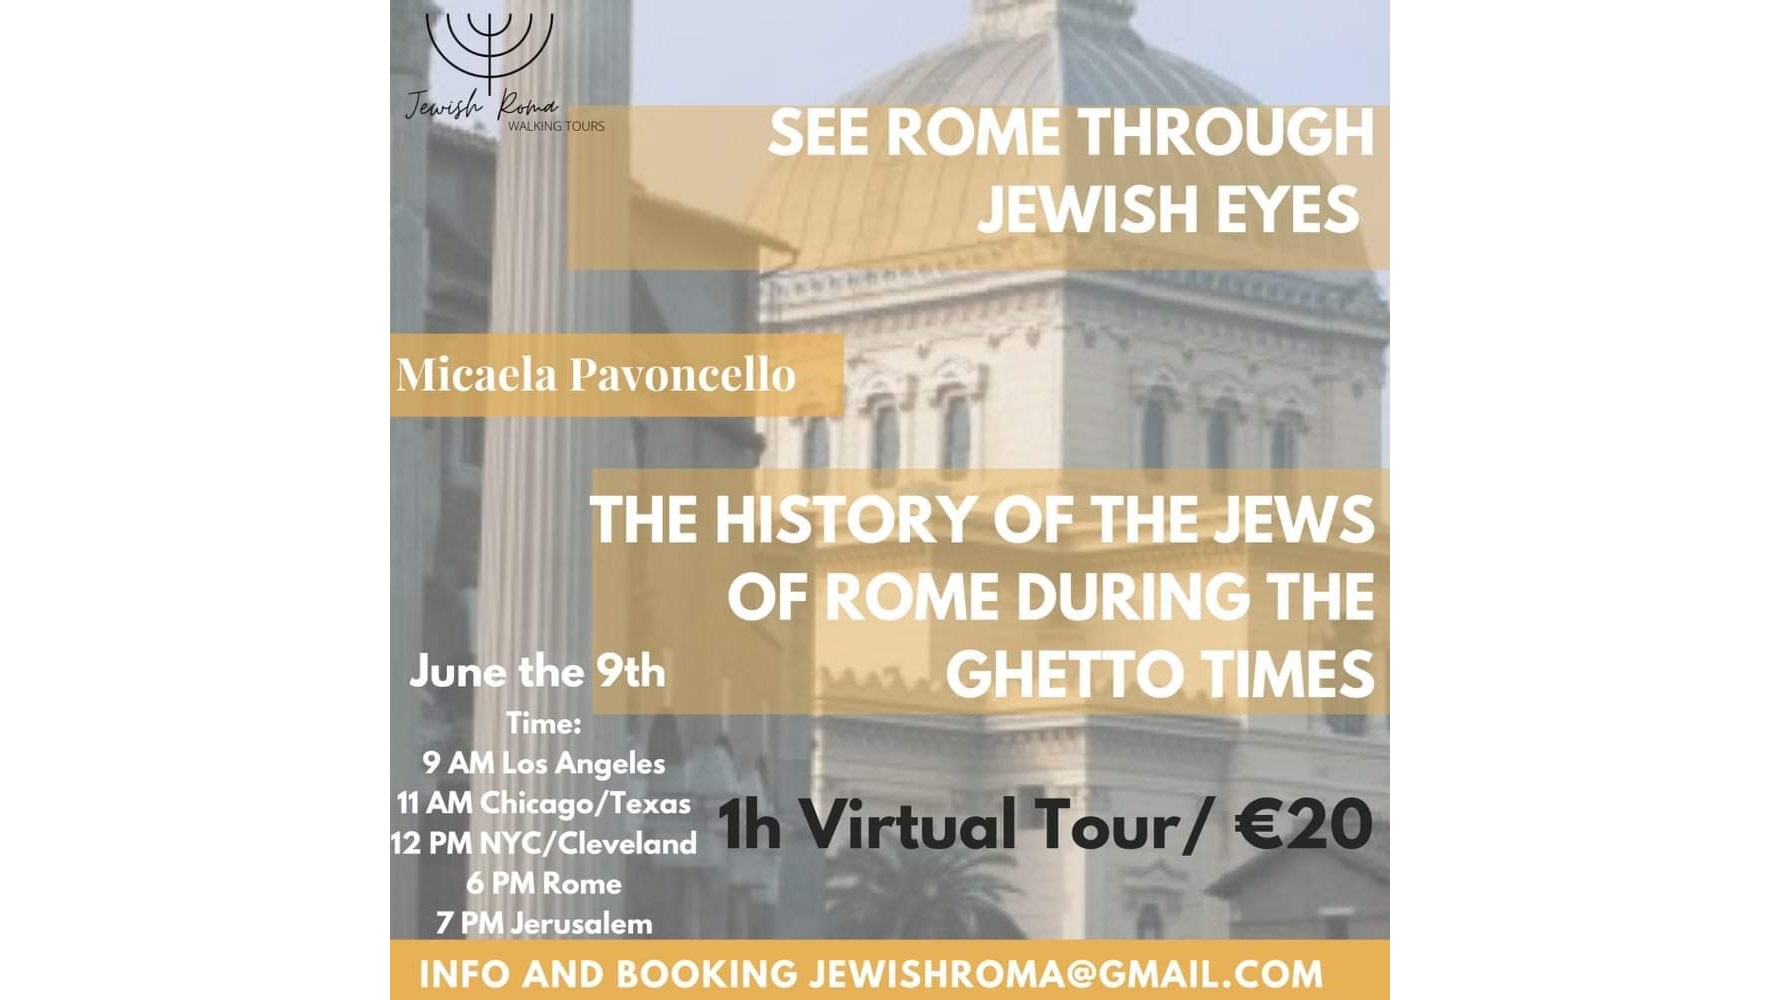 The History of the Jews of Rome During the Ghetto Times